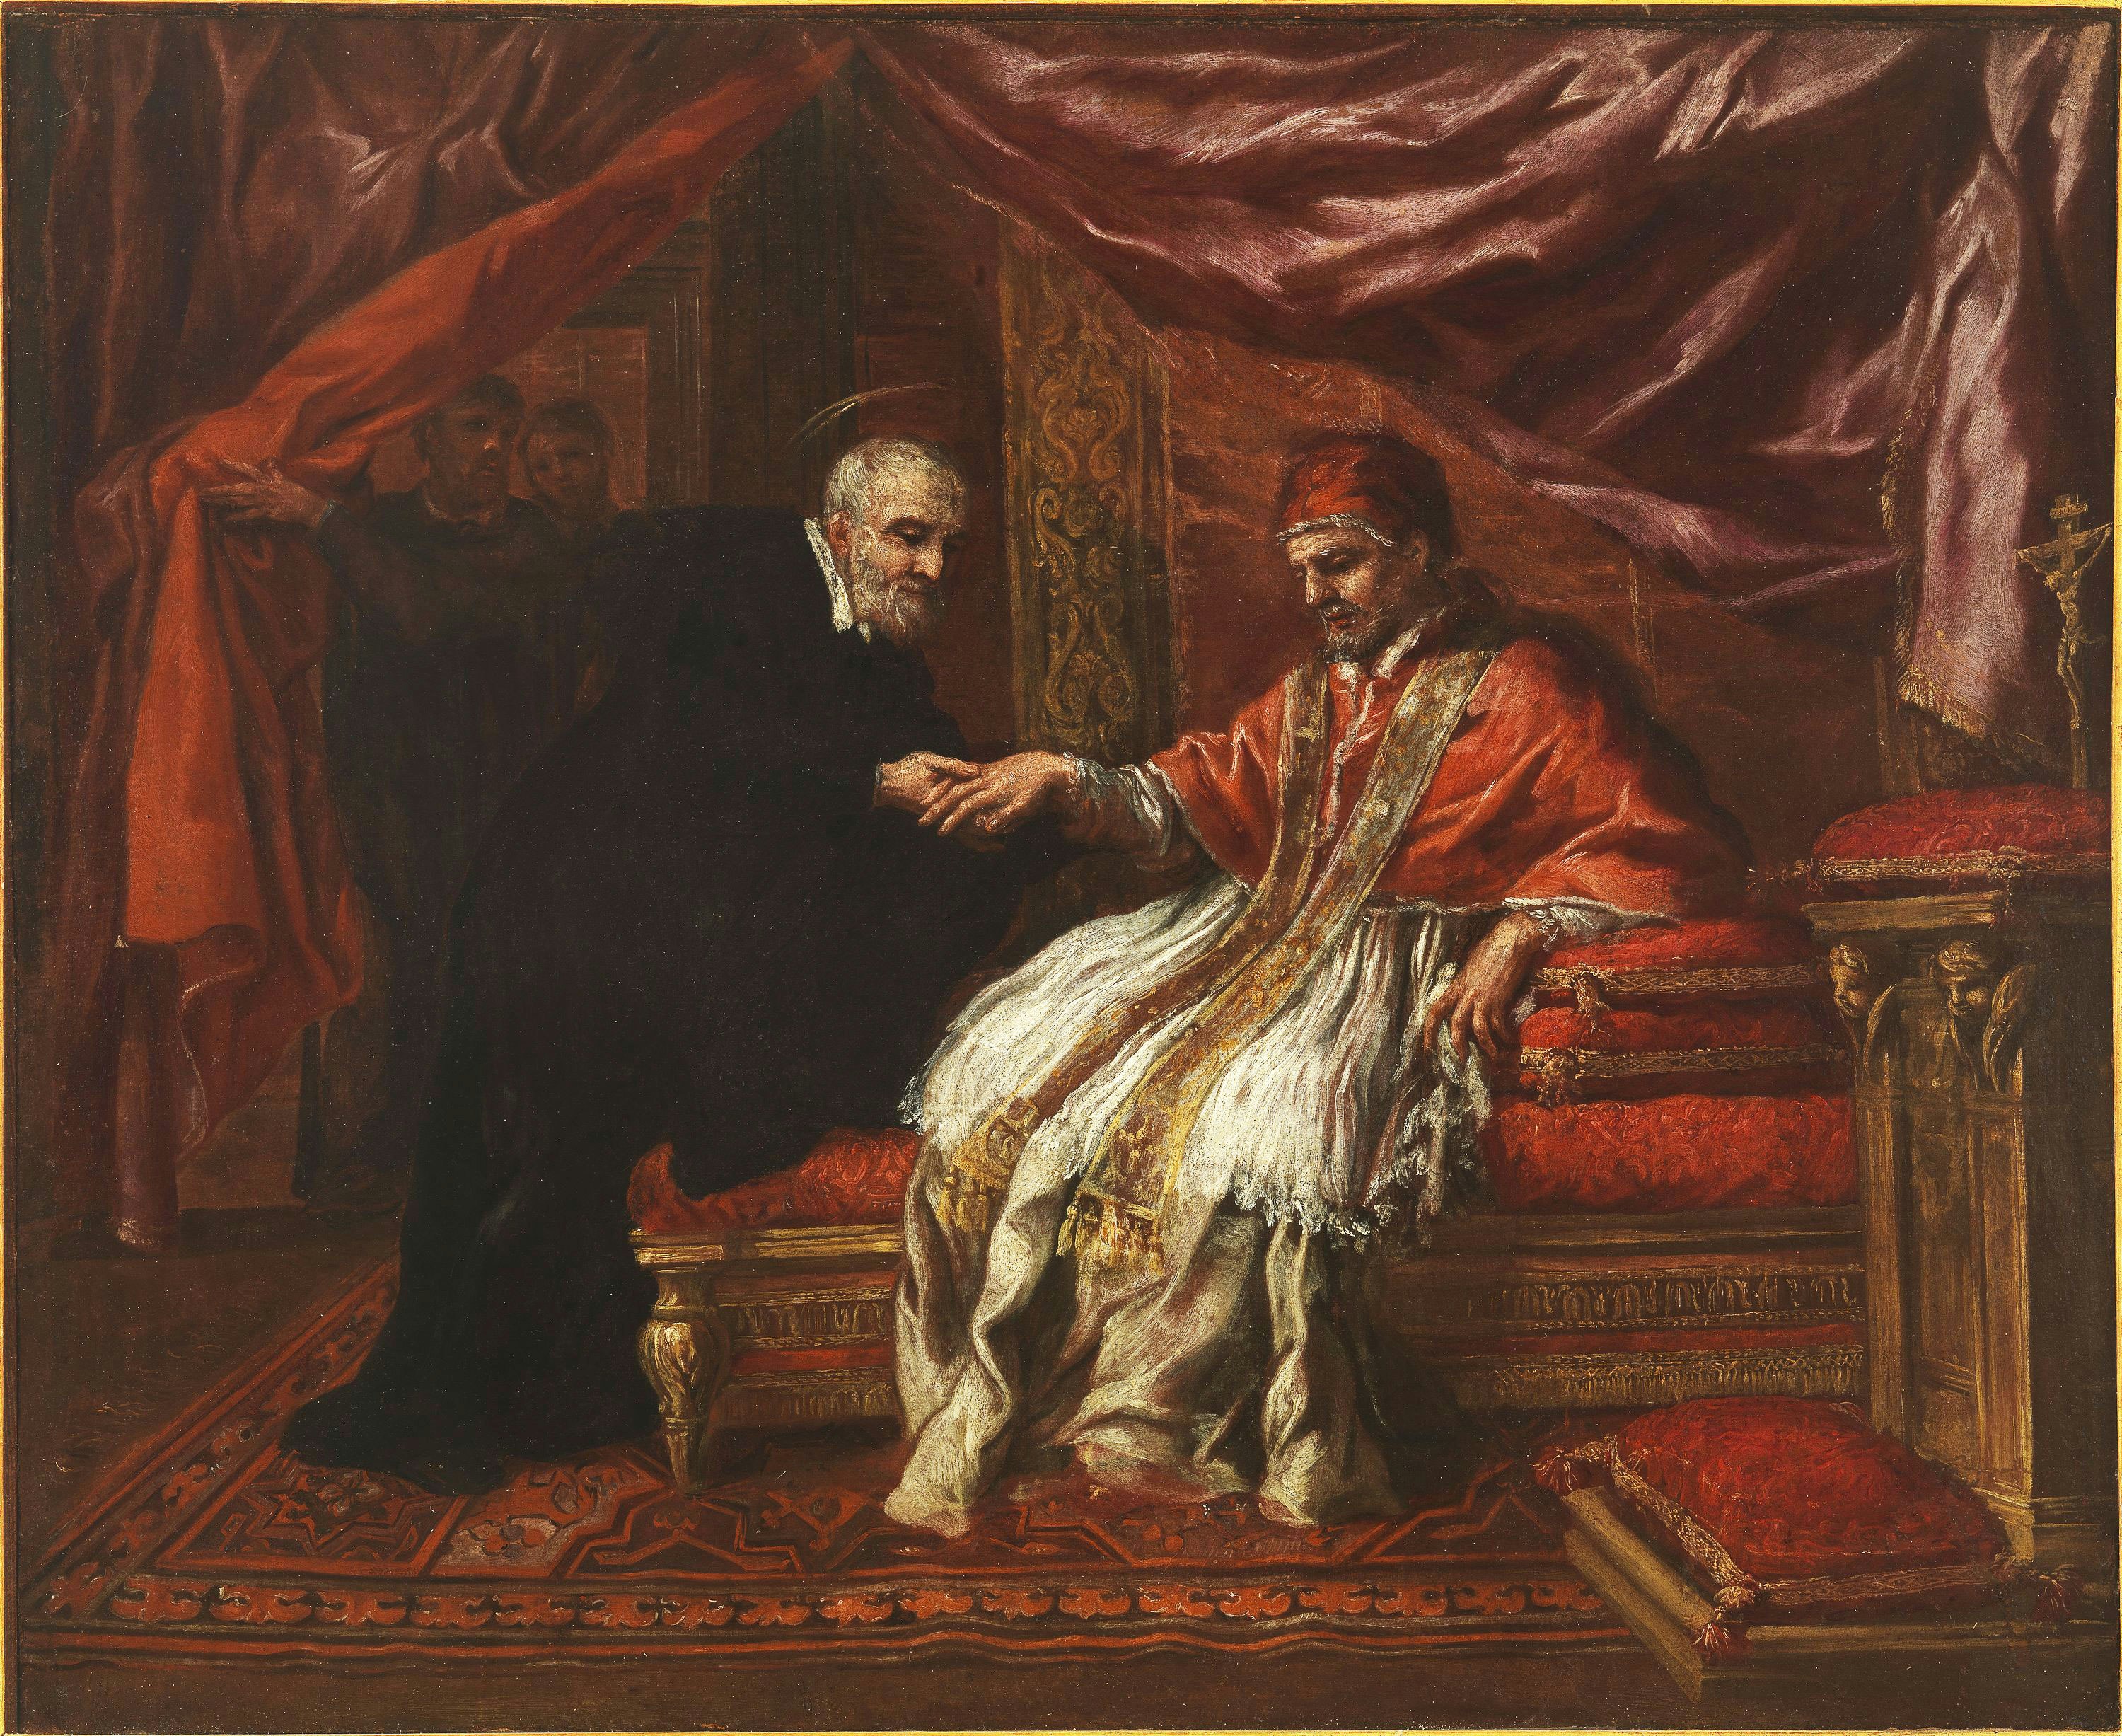 St Philip Neri cures Pope Clement VIII from gout